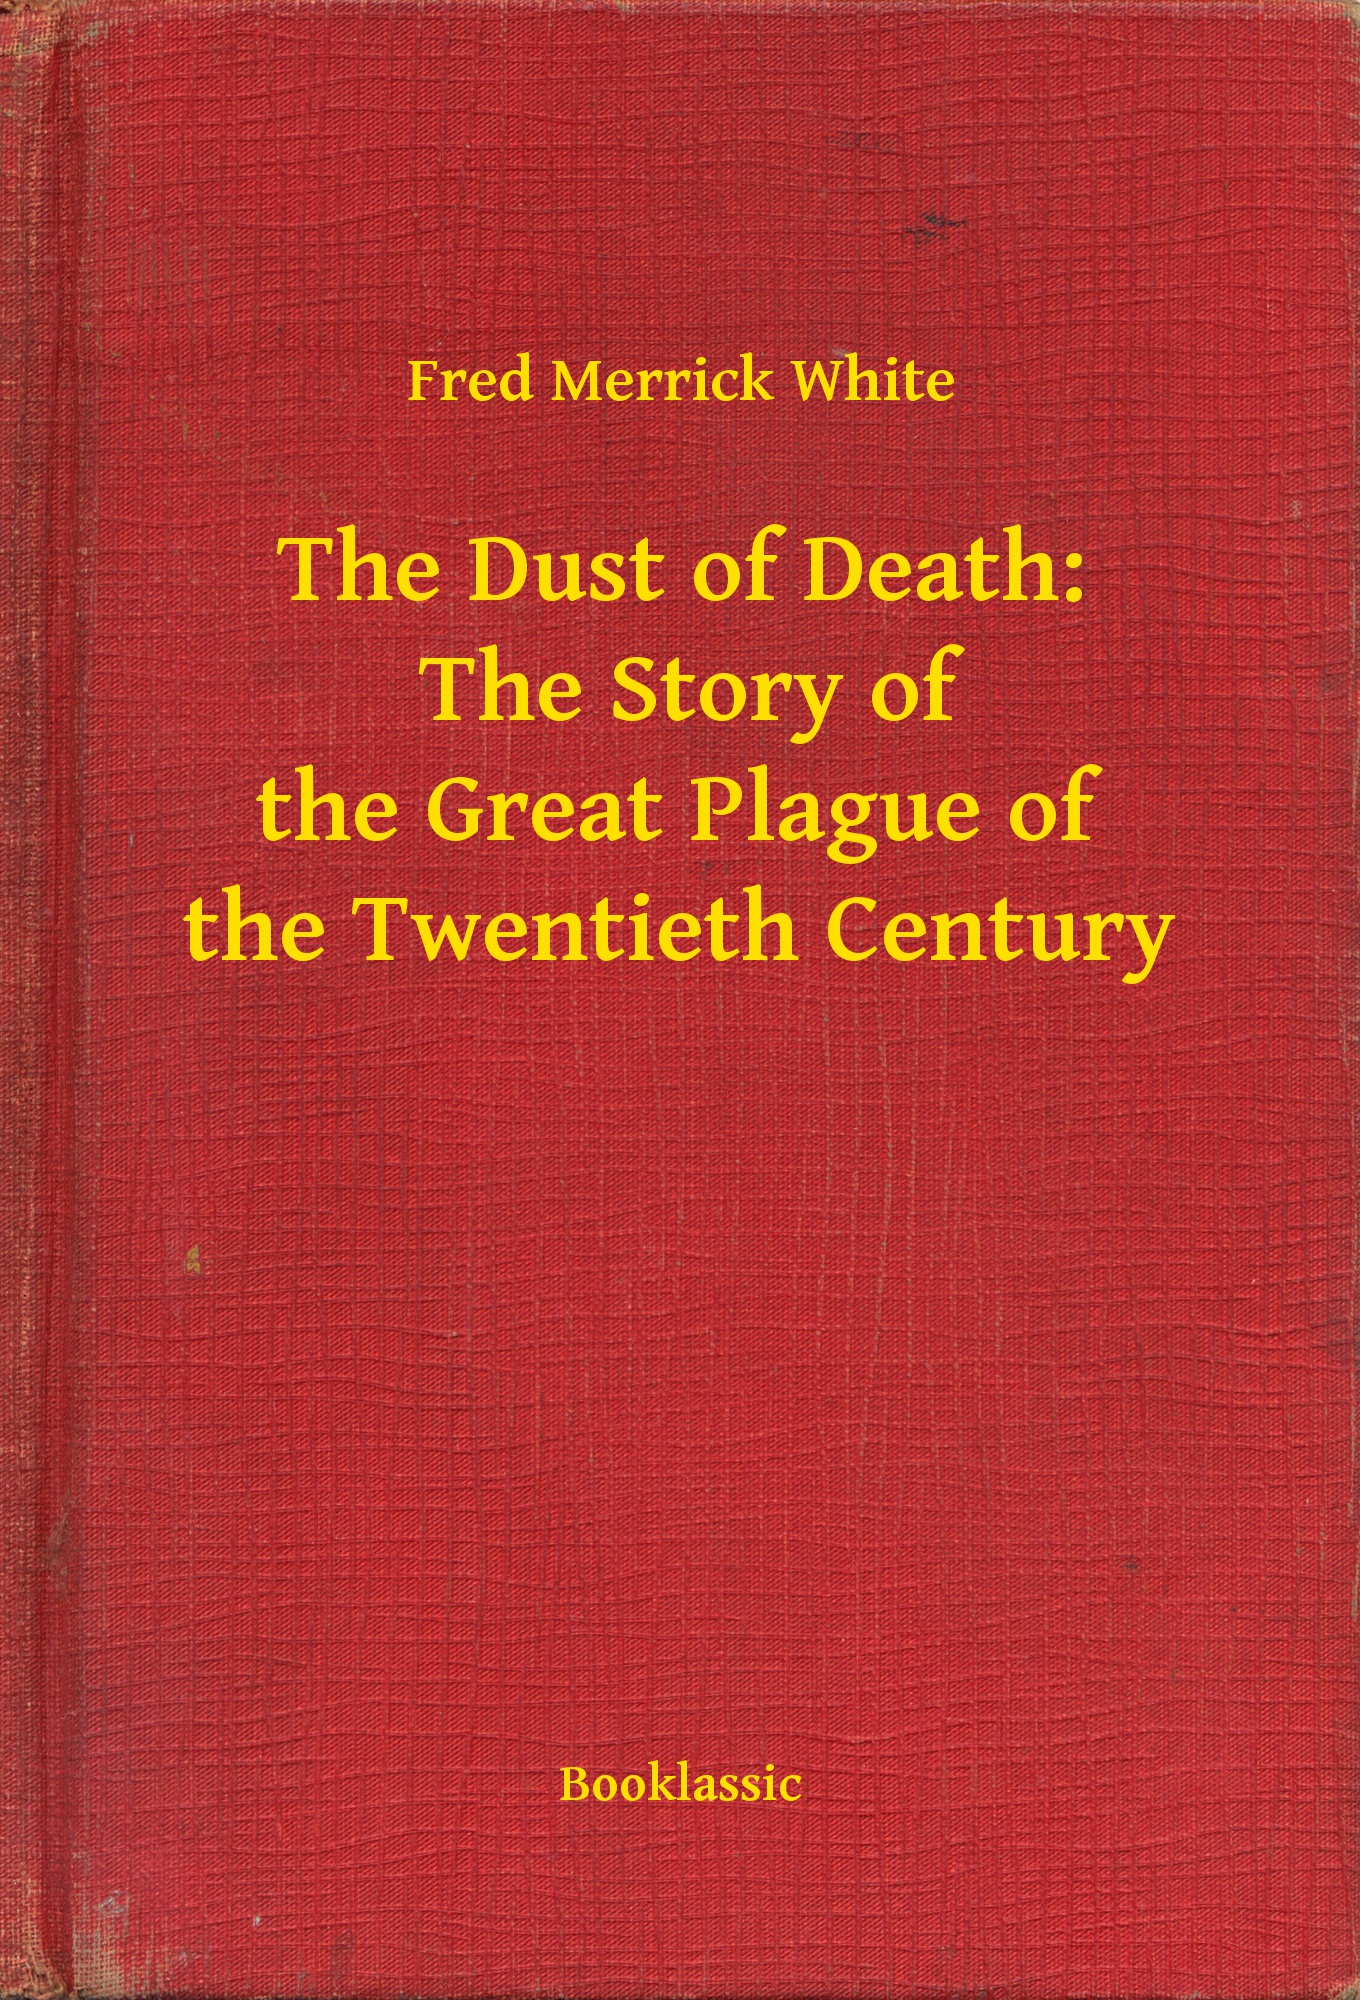 The Dust of Death:  The Story of the Great Plague of the Twentieth Century